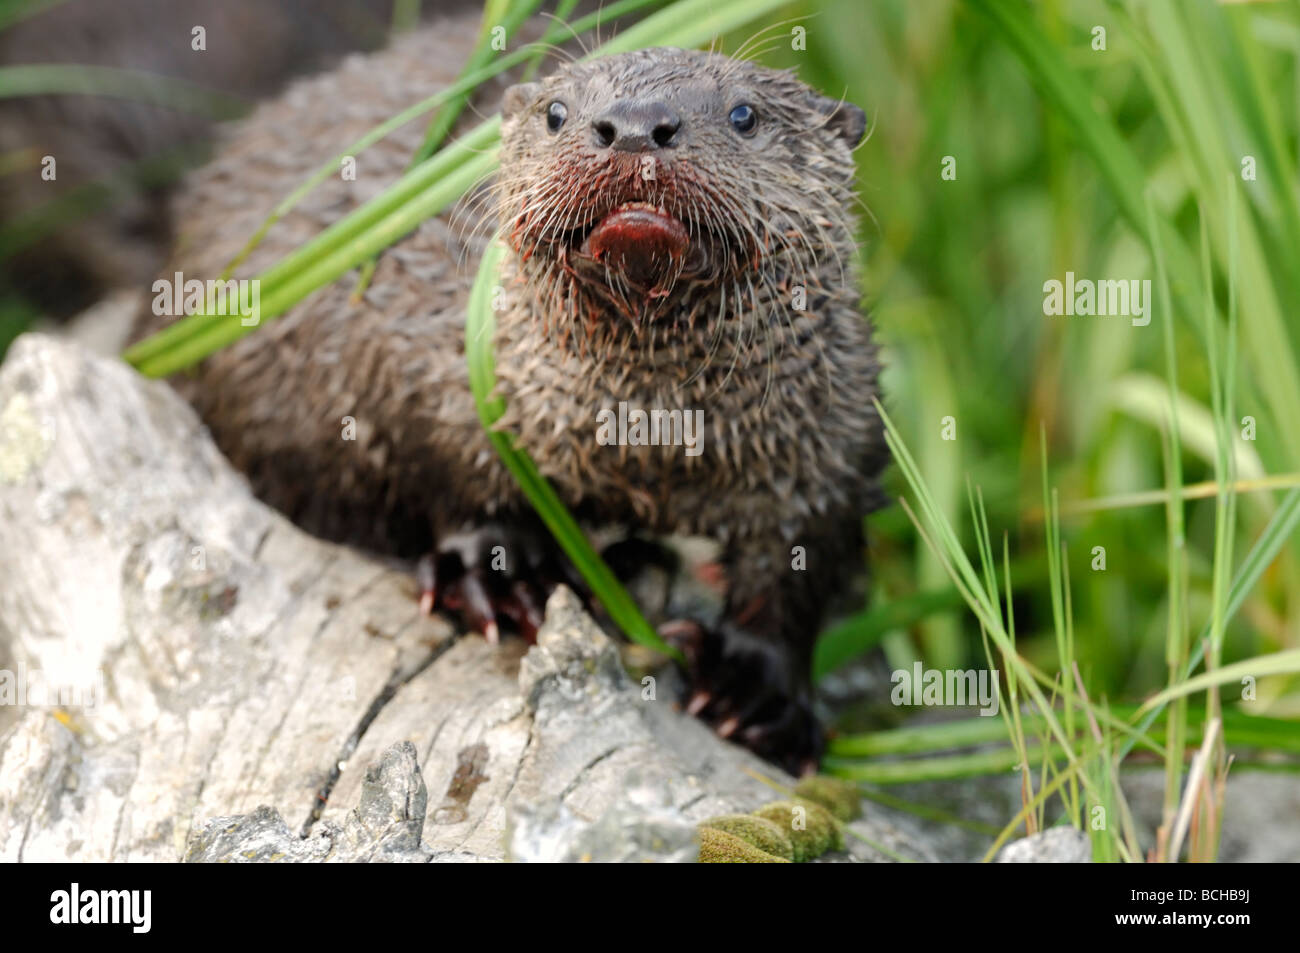 Stock photo of a young river otter with a bloody muzzle from eating a trout, Yellowstone National Park, 2009. Stock Photo